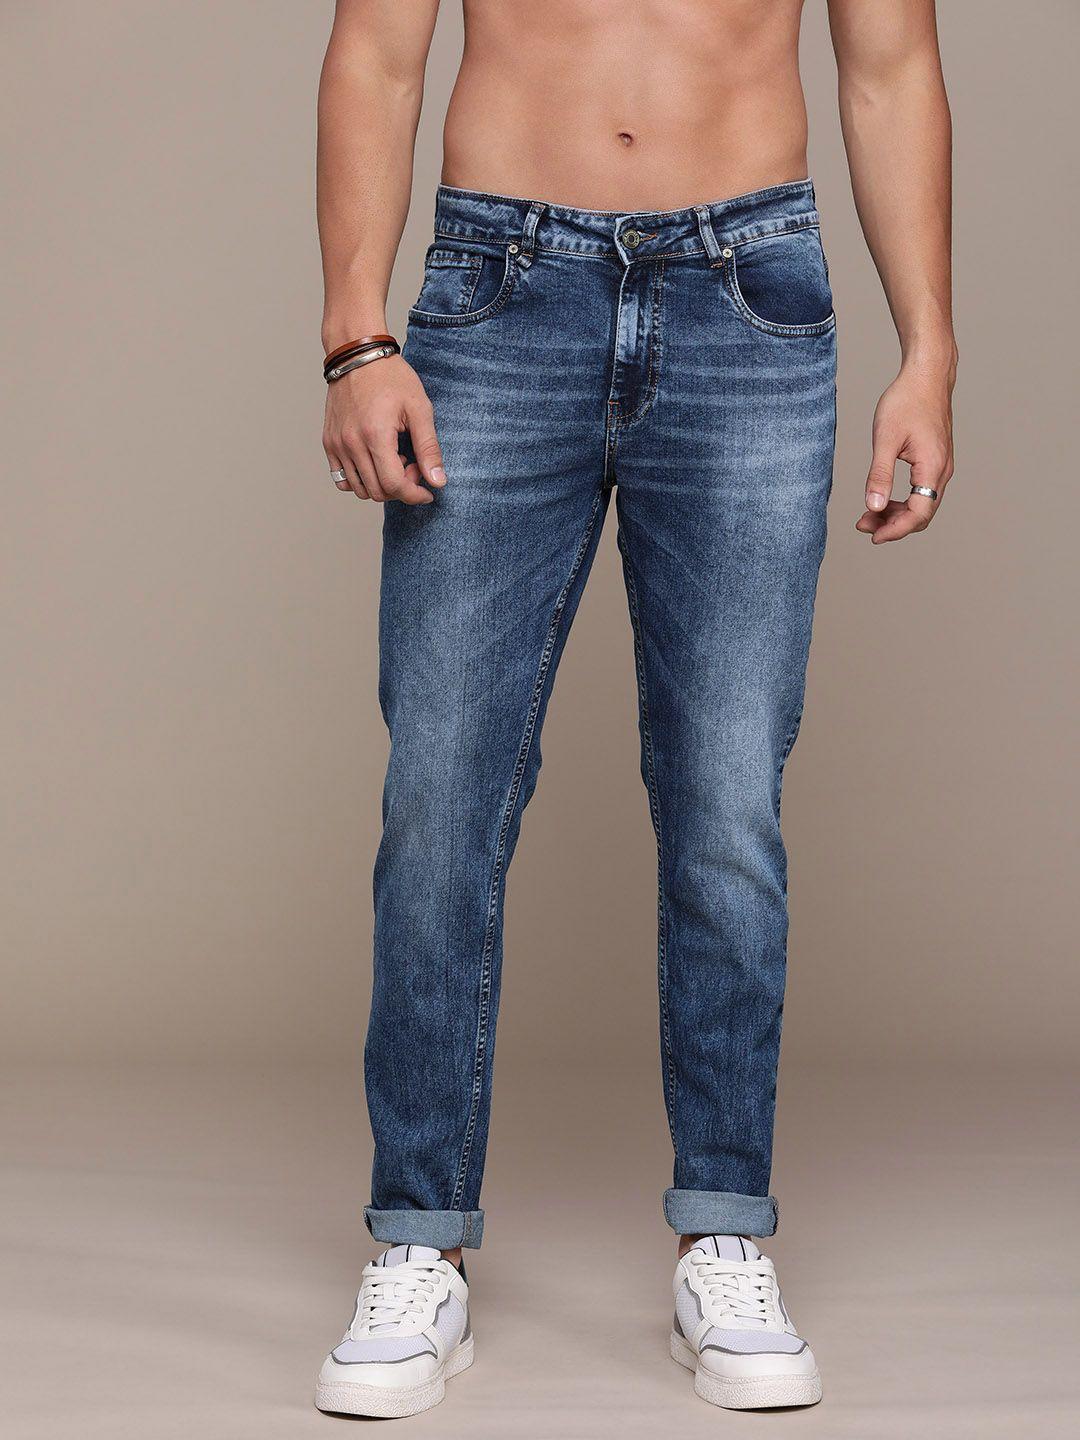 the-roadster-life-co.-men-regular-fit-heavy-fade-stretchable-jeans